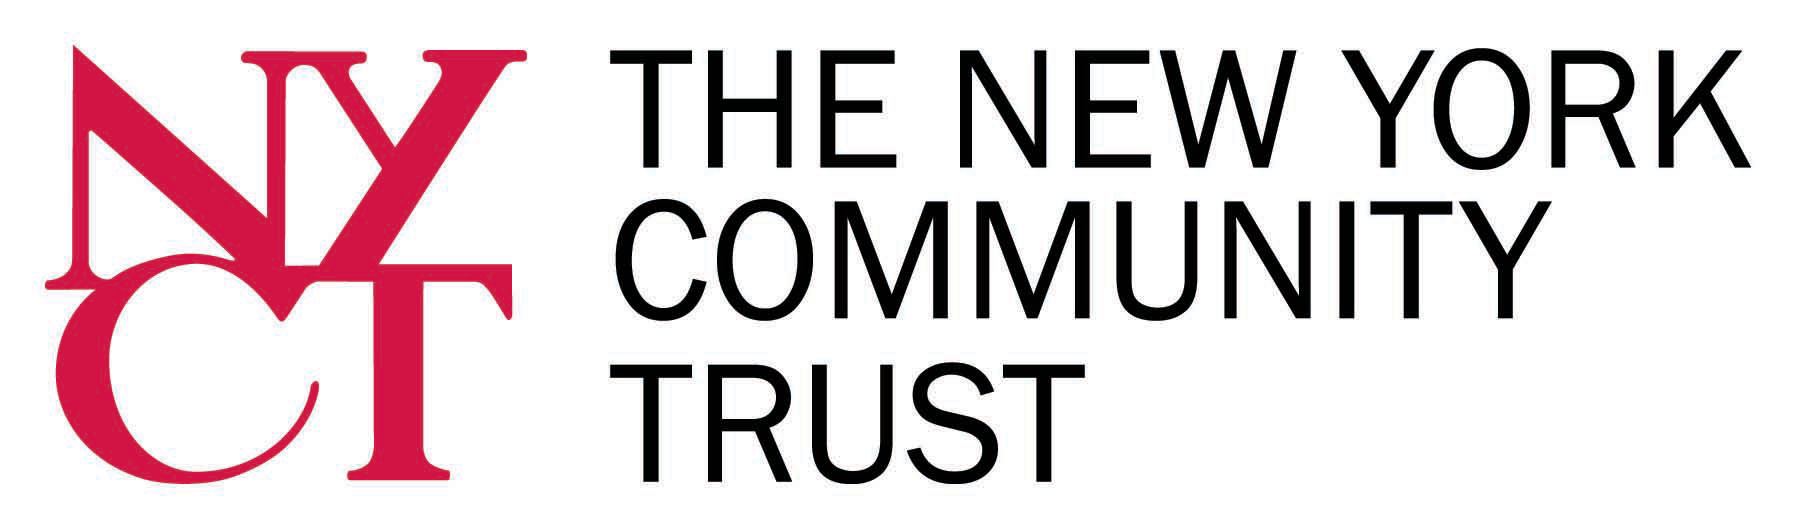 The New York Community Trust logo bright red and black font.